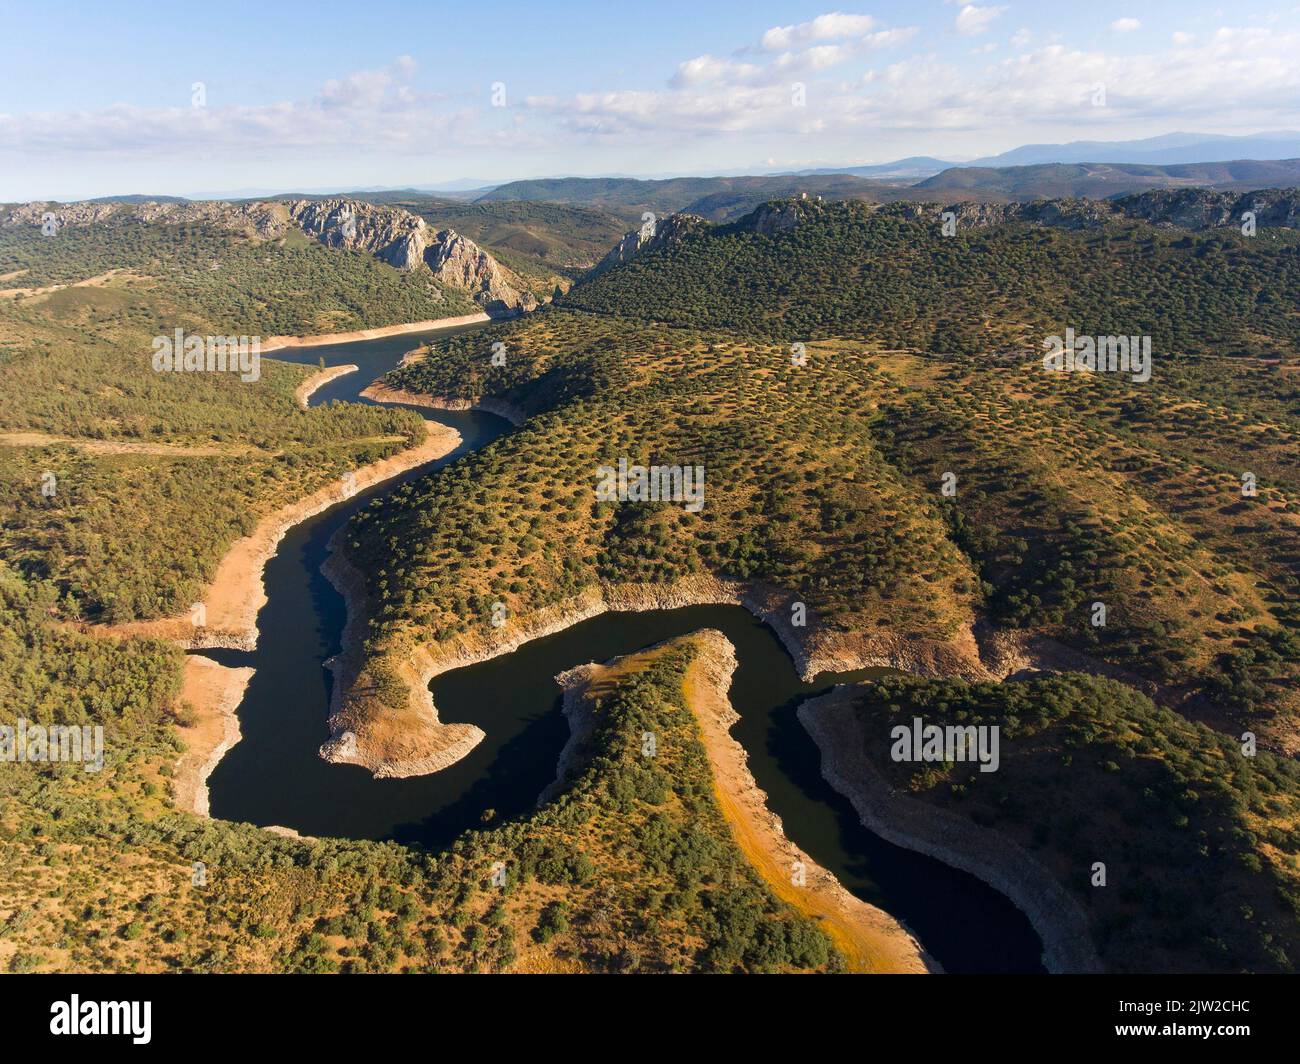 Dehesa, holm oak forest with river, drone shot, Monfraguee National Park, Extremadura, Spain Stock Photo